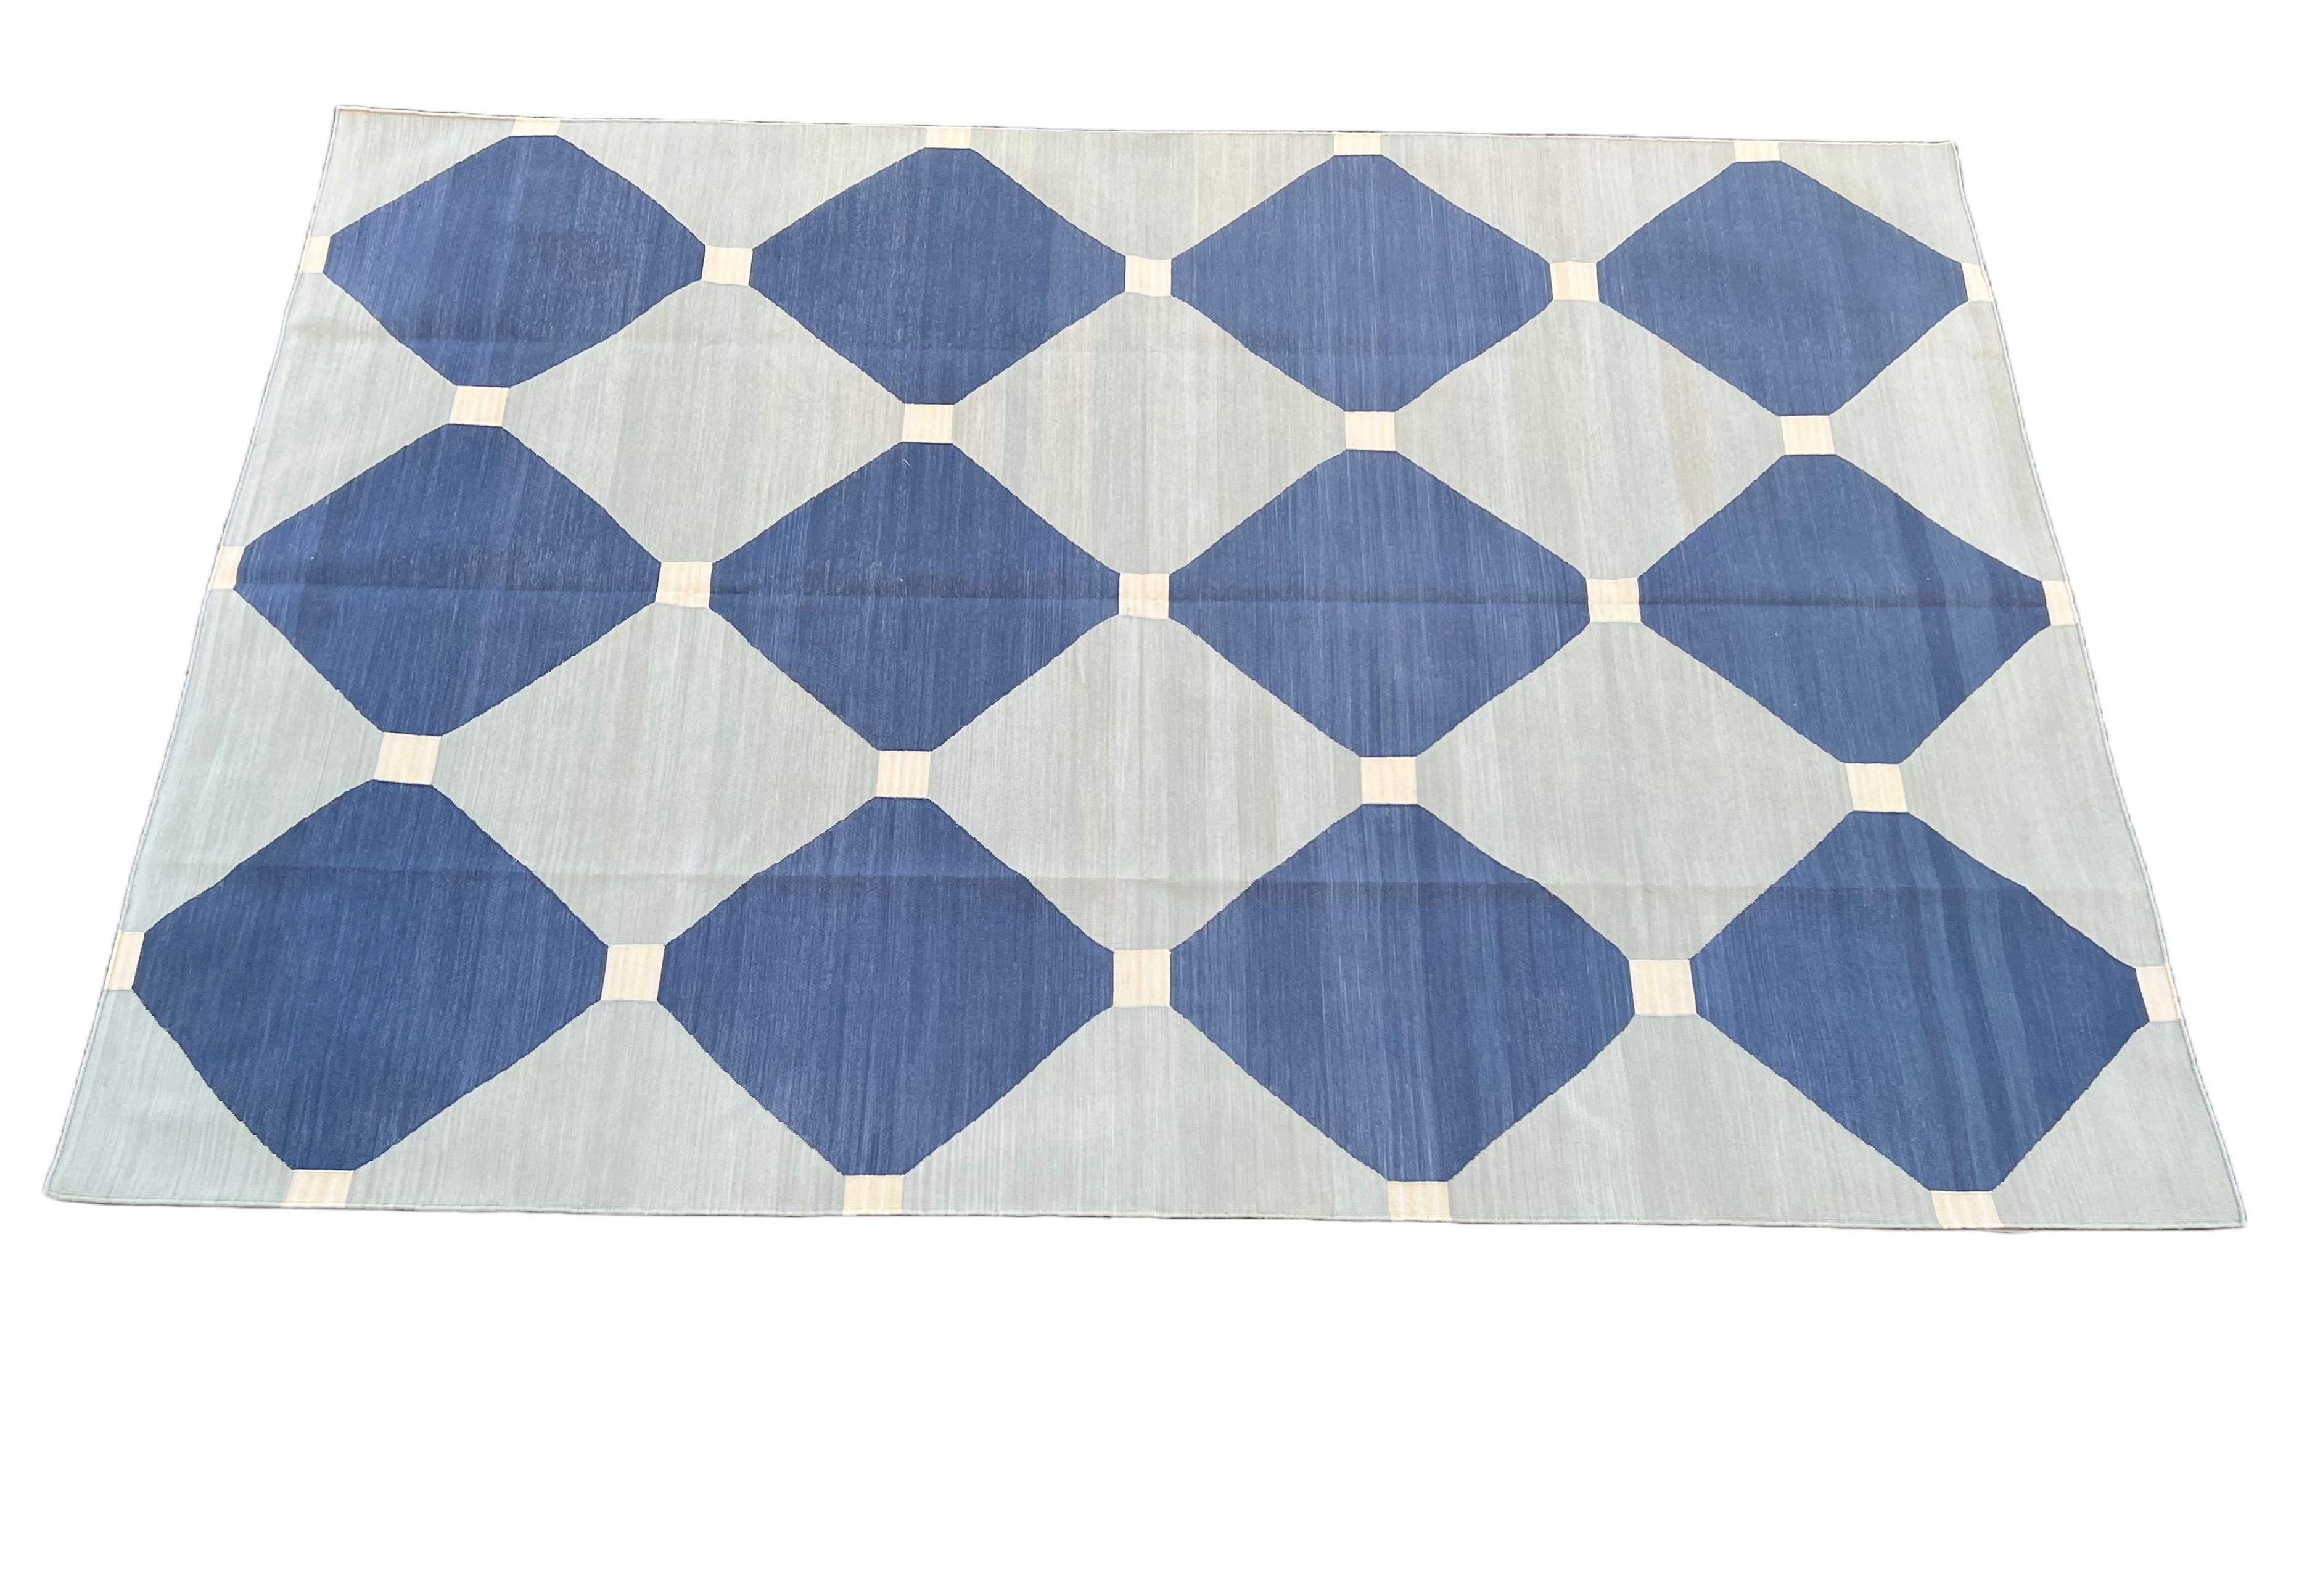 Handmade Cotton Area Flat Weave Rug, 6x9 Grey And Blue Tile Patterned Dhurrie For Sale 5